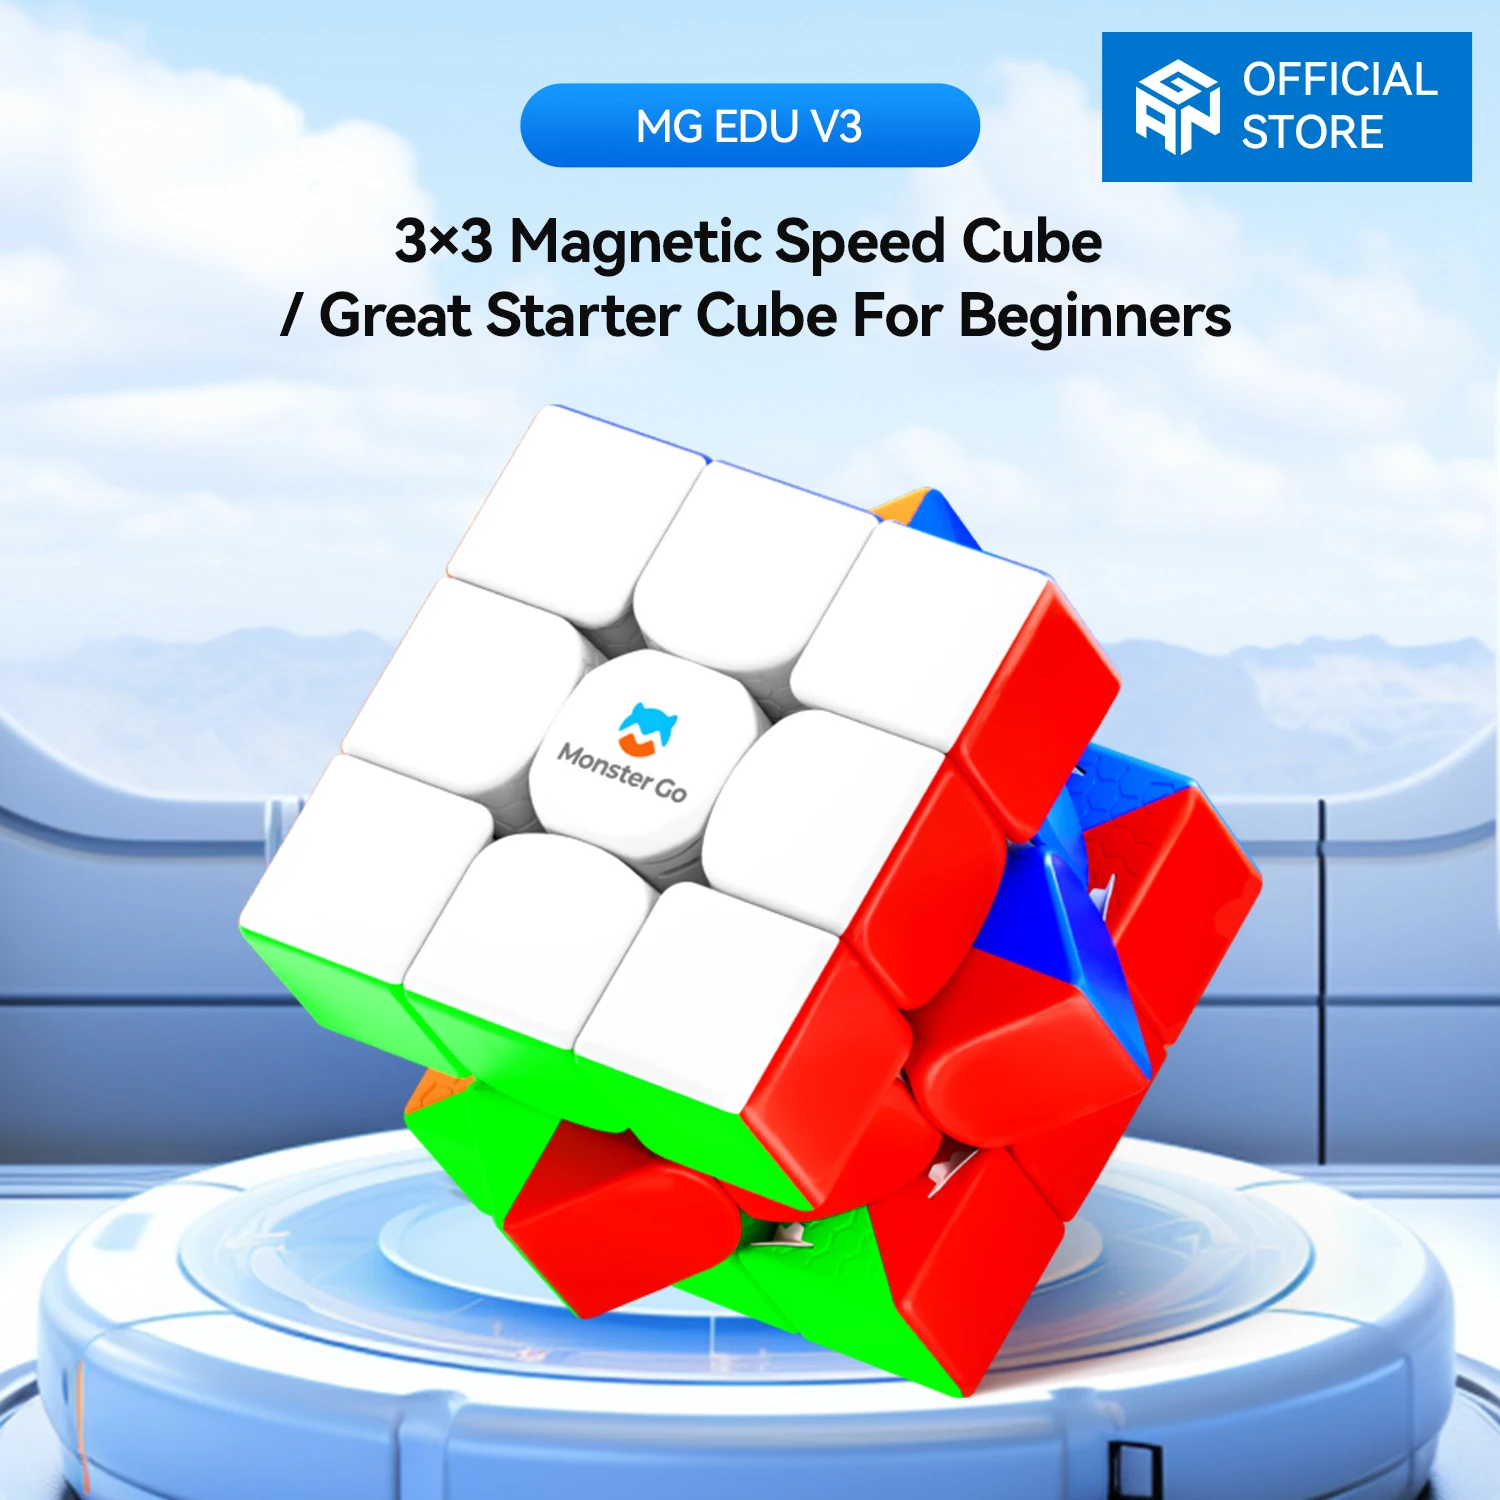 

Monster Go Magnetic Magic Cube 3x3 EDU Speed Cube MG 356 Educational Cube Puzzle Toy For Kids Beginners Practices